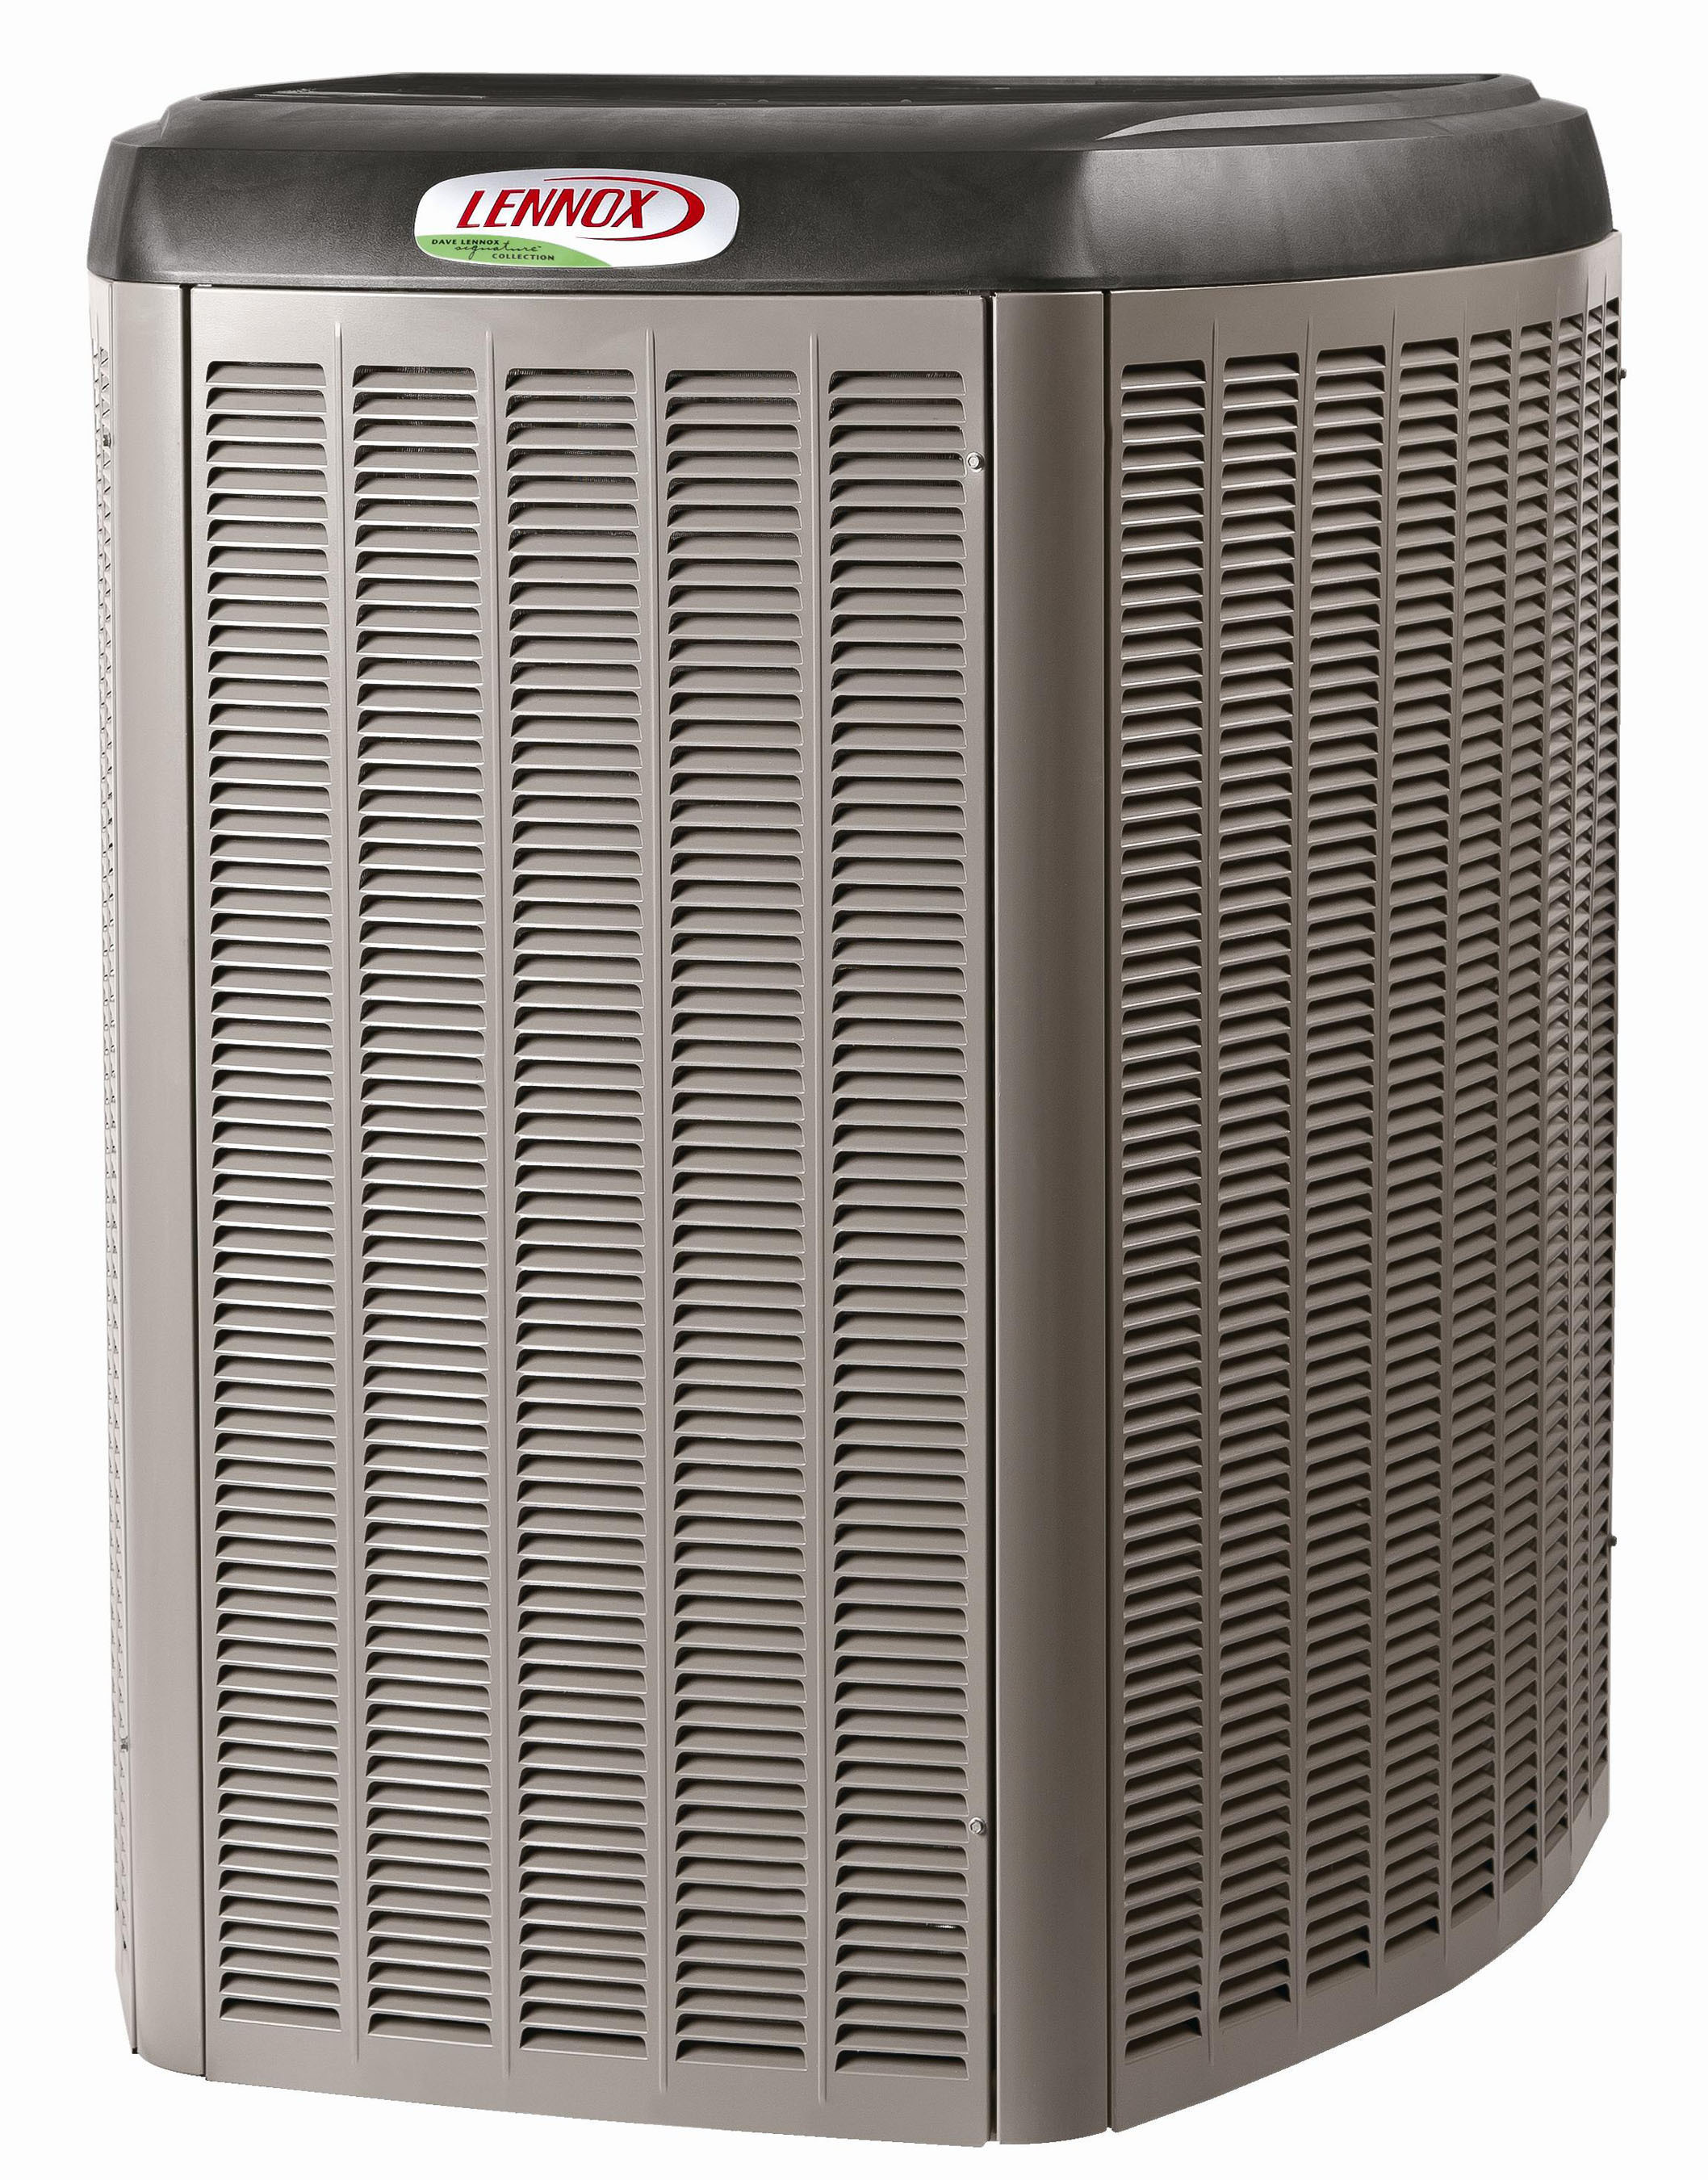 lennox-introduces-most-efficient-and-precise-residential-air